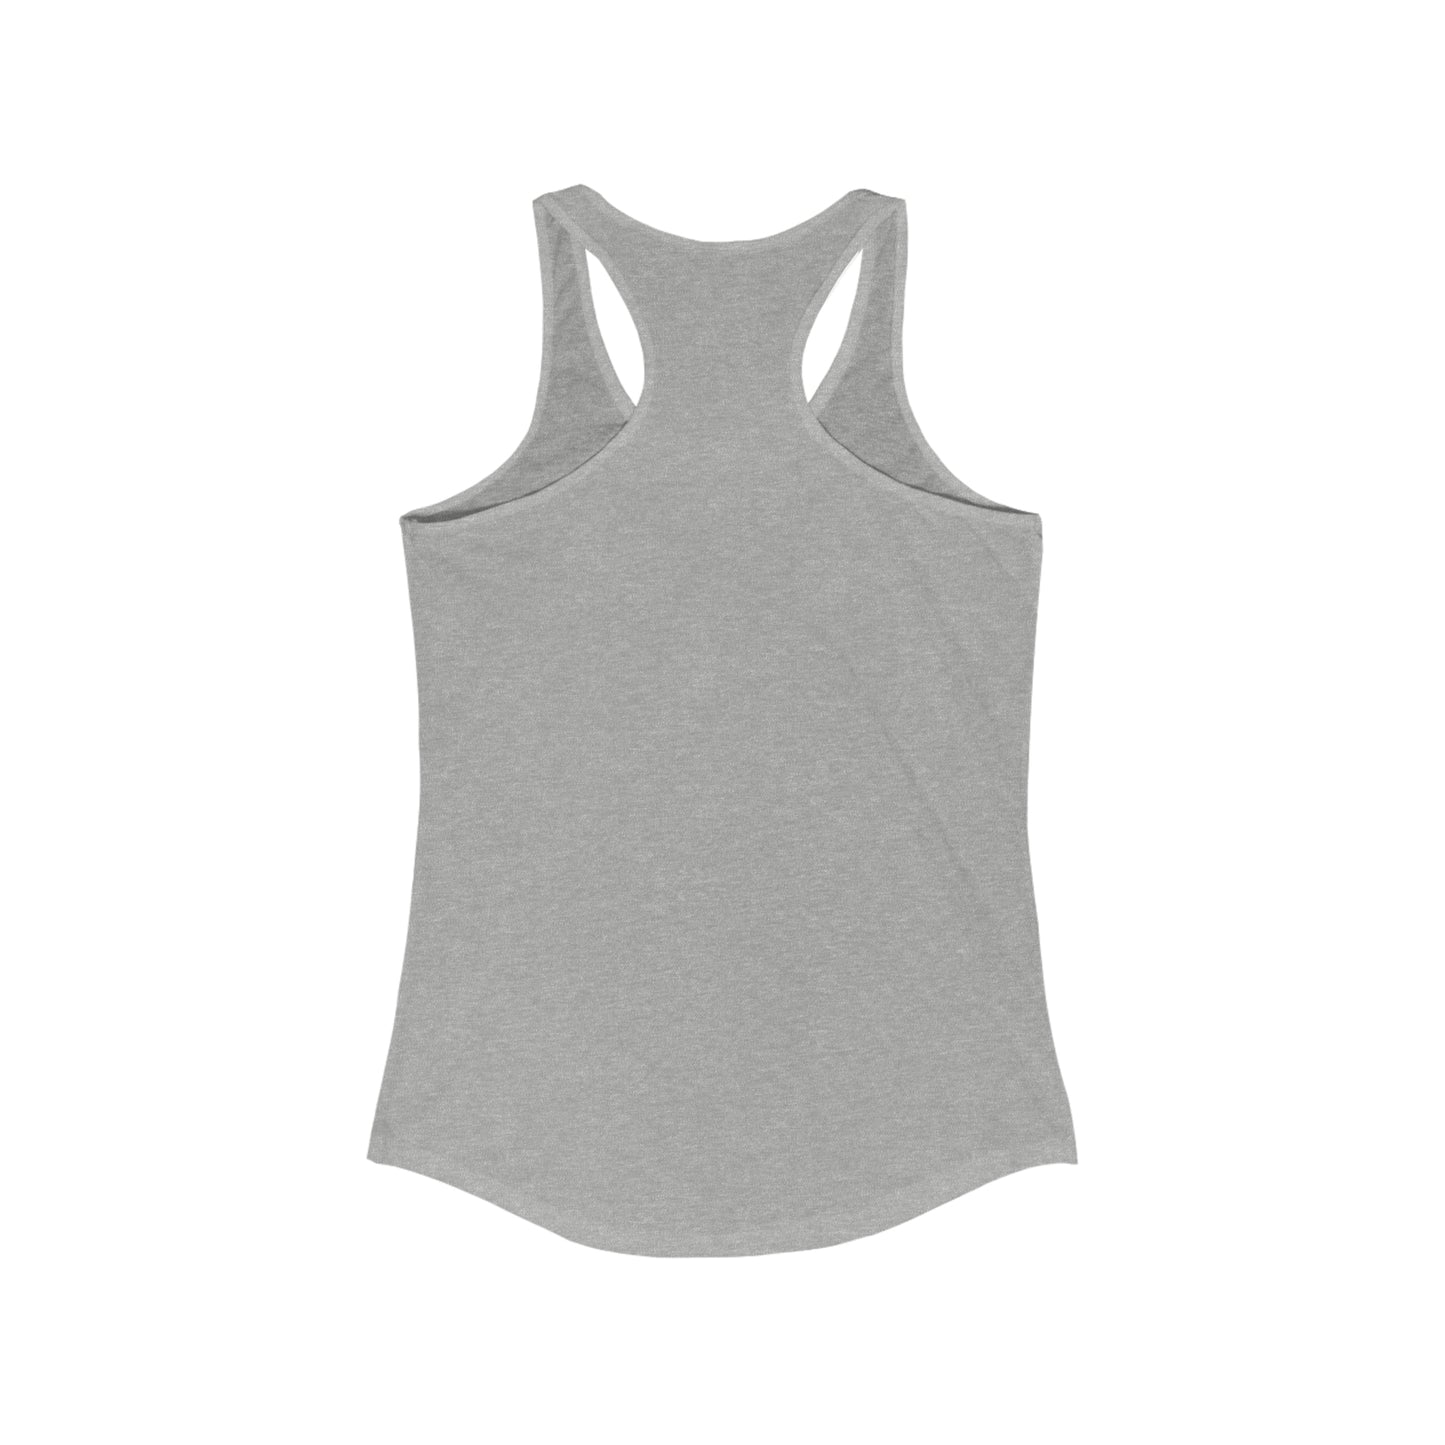 All About That Base - Women's Ideal Racerback Tank